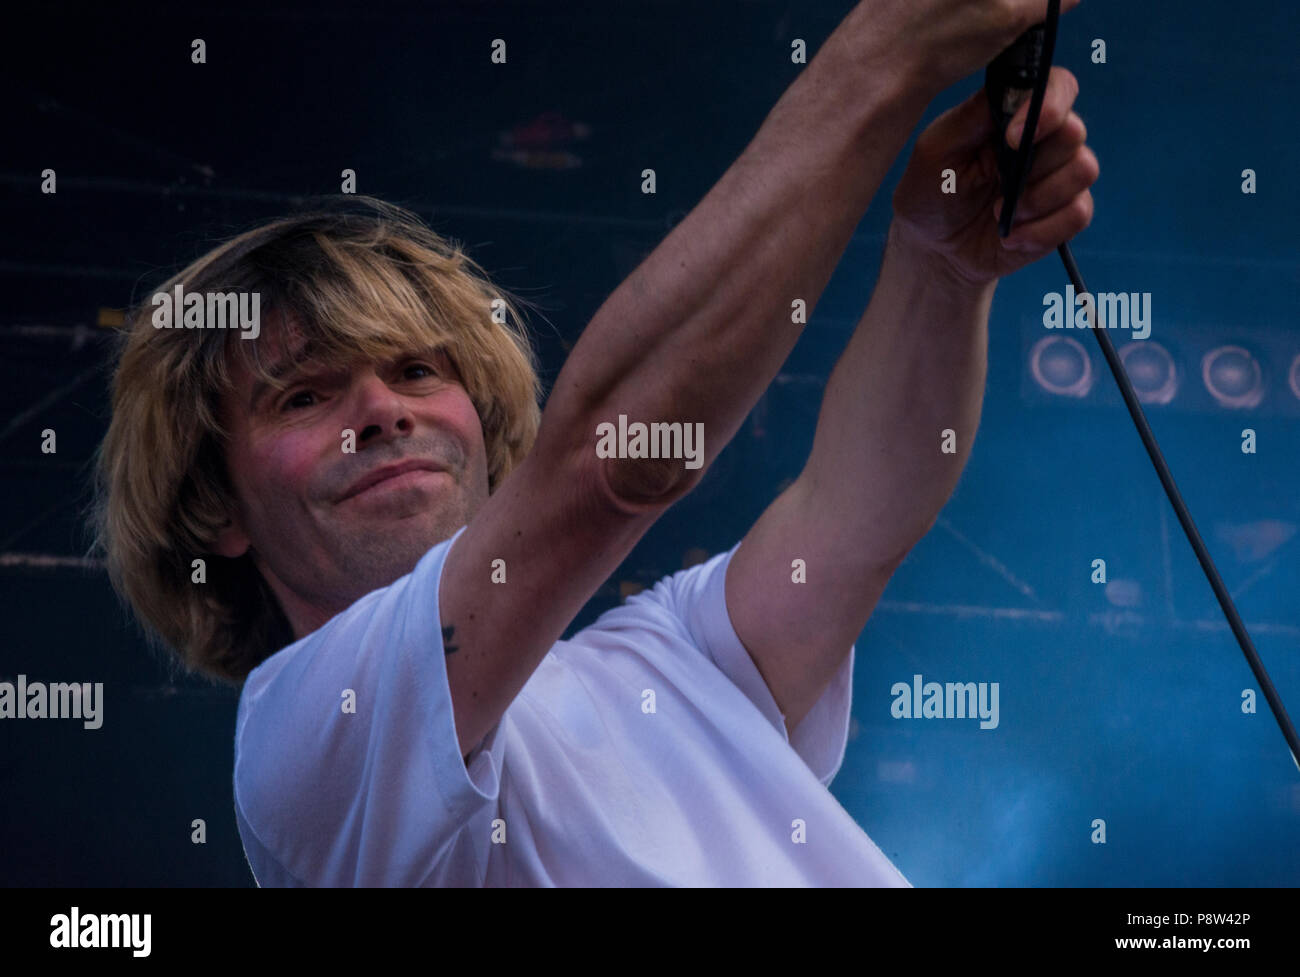 Tim Burgess of The Charlatans performing live on the Obelisk Stage at Latitude Festival, Henham Park, Suffolk, England, 13 July 2018. Stock Photo